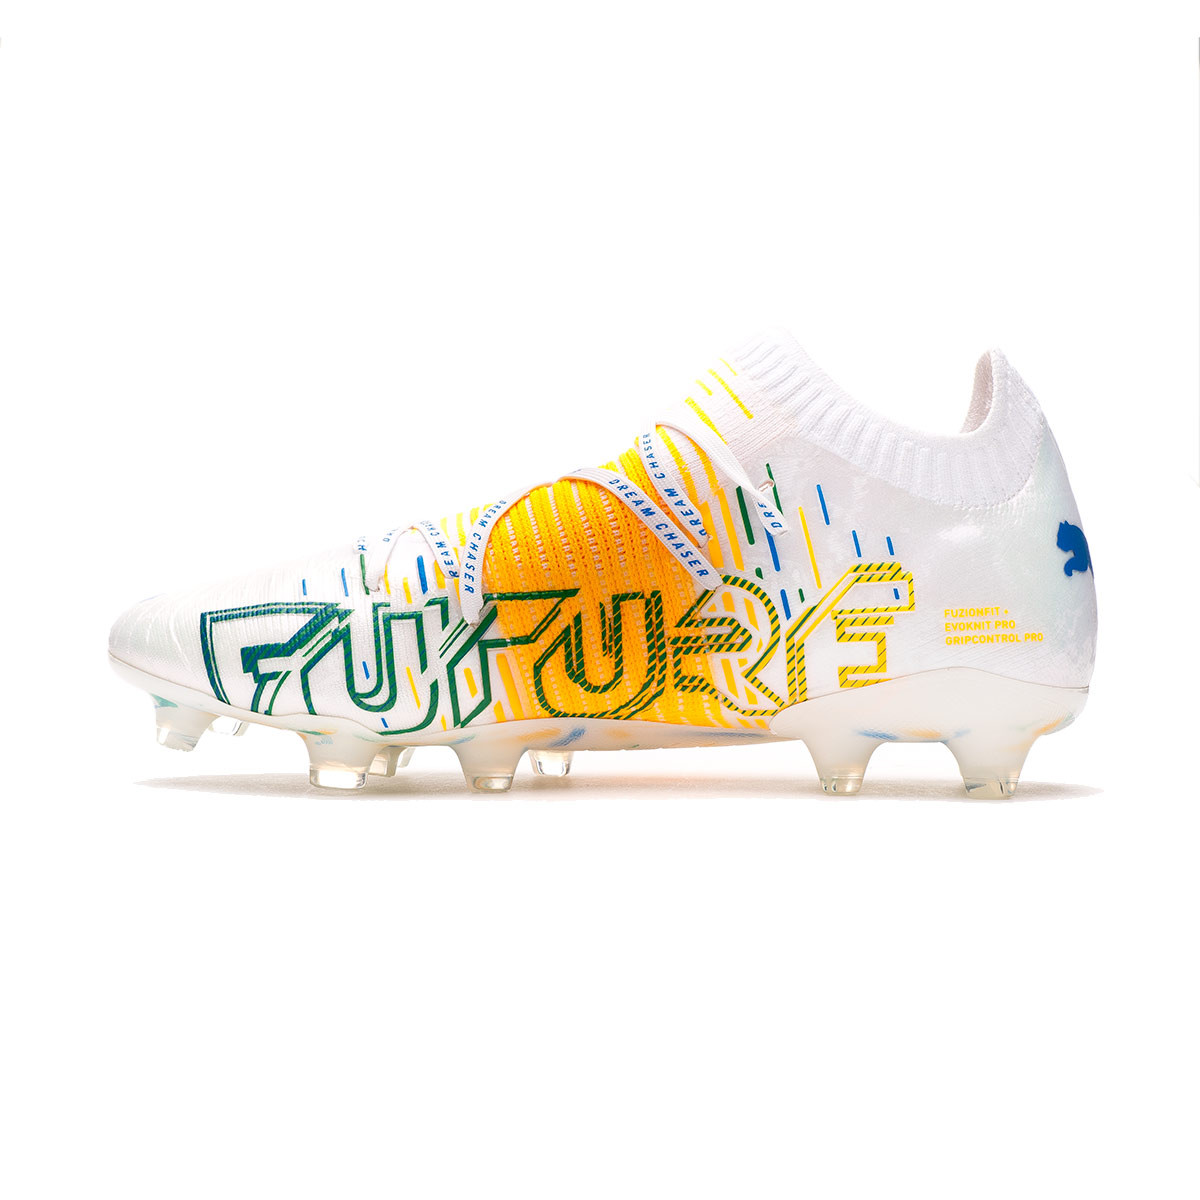 Puma Future Z Football Bootslimited Special Sales And Special Offers Women S Men S Sneakers Sports Shoes Shop Athletic Shoes Online Off 53 Free Shipping Fast Shippment